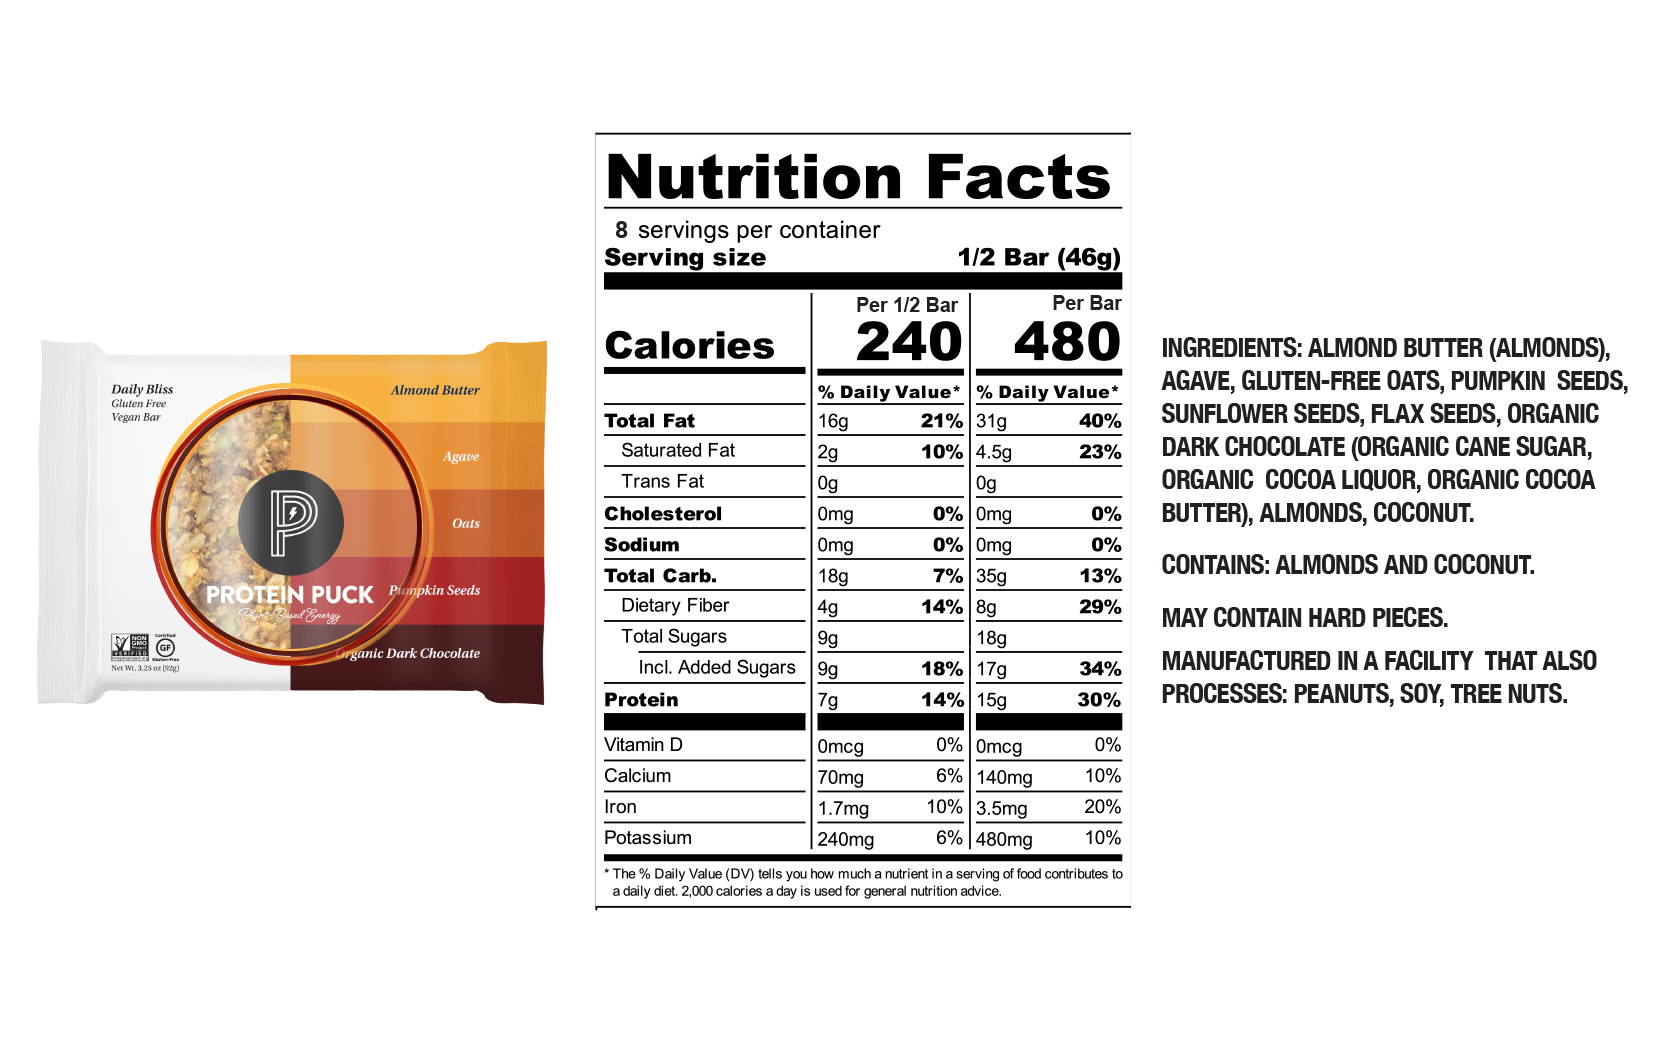 Variety Pack's Daily Bliss Nutrition Facts 